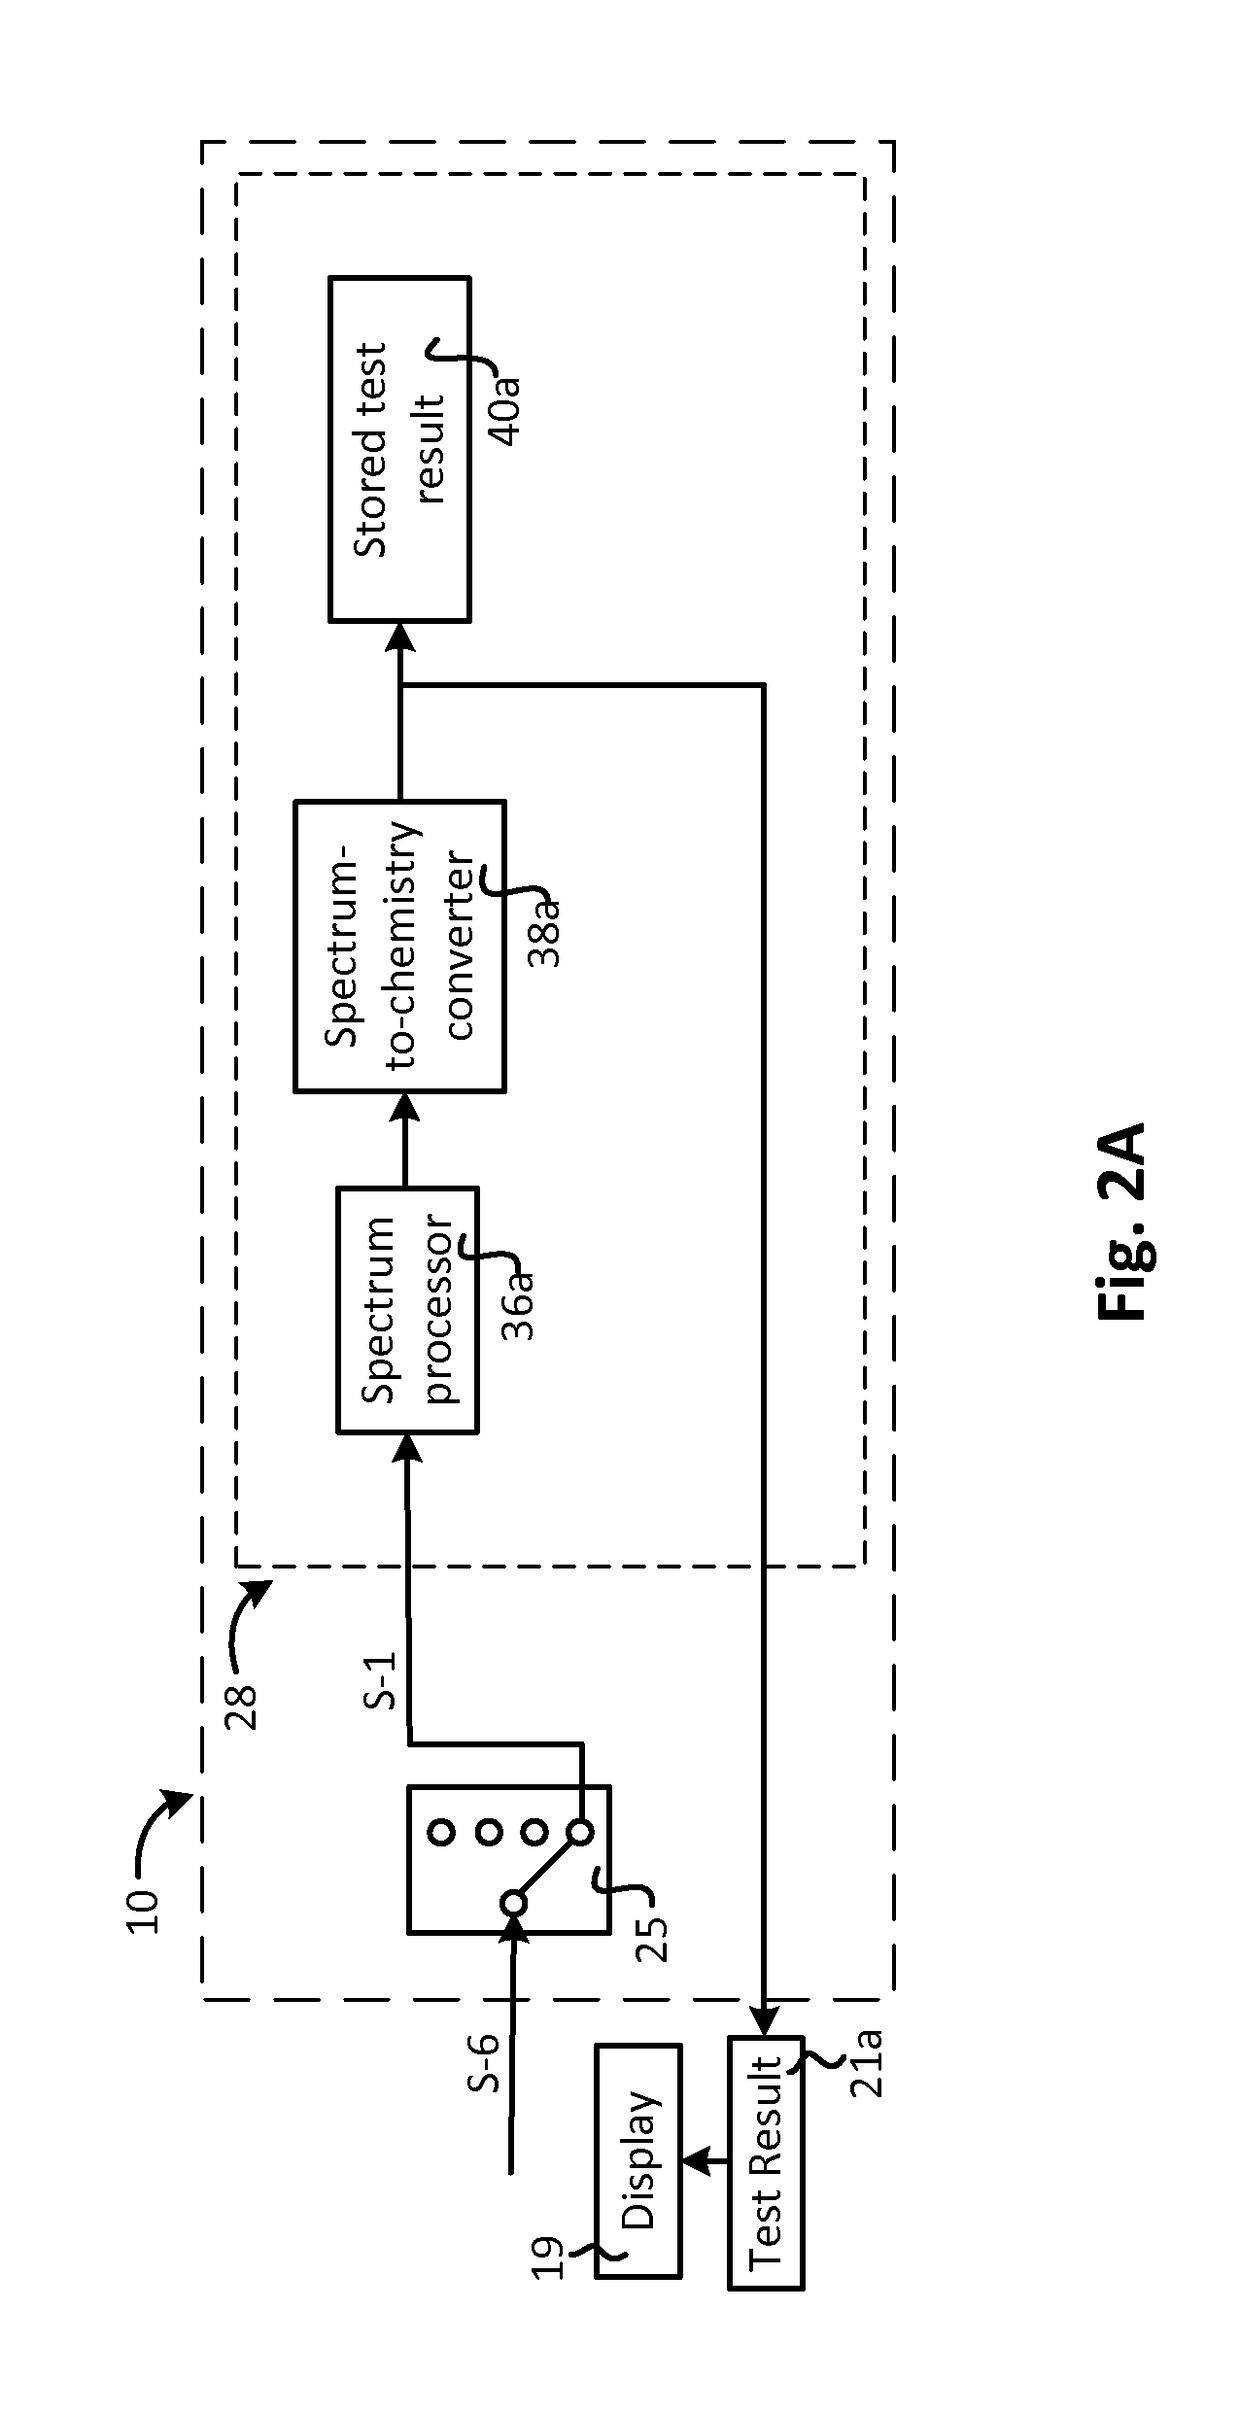 Xrf/xrd system with dynamic management of multiple data processing units